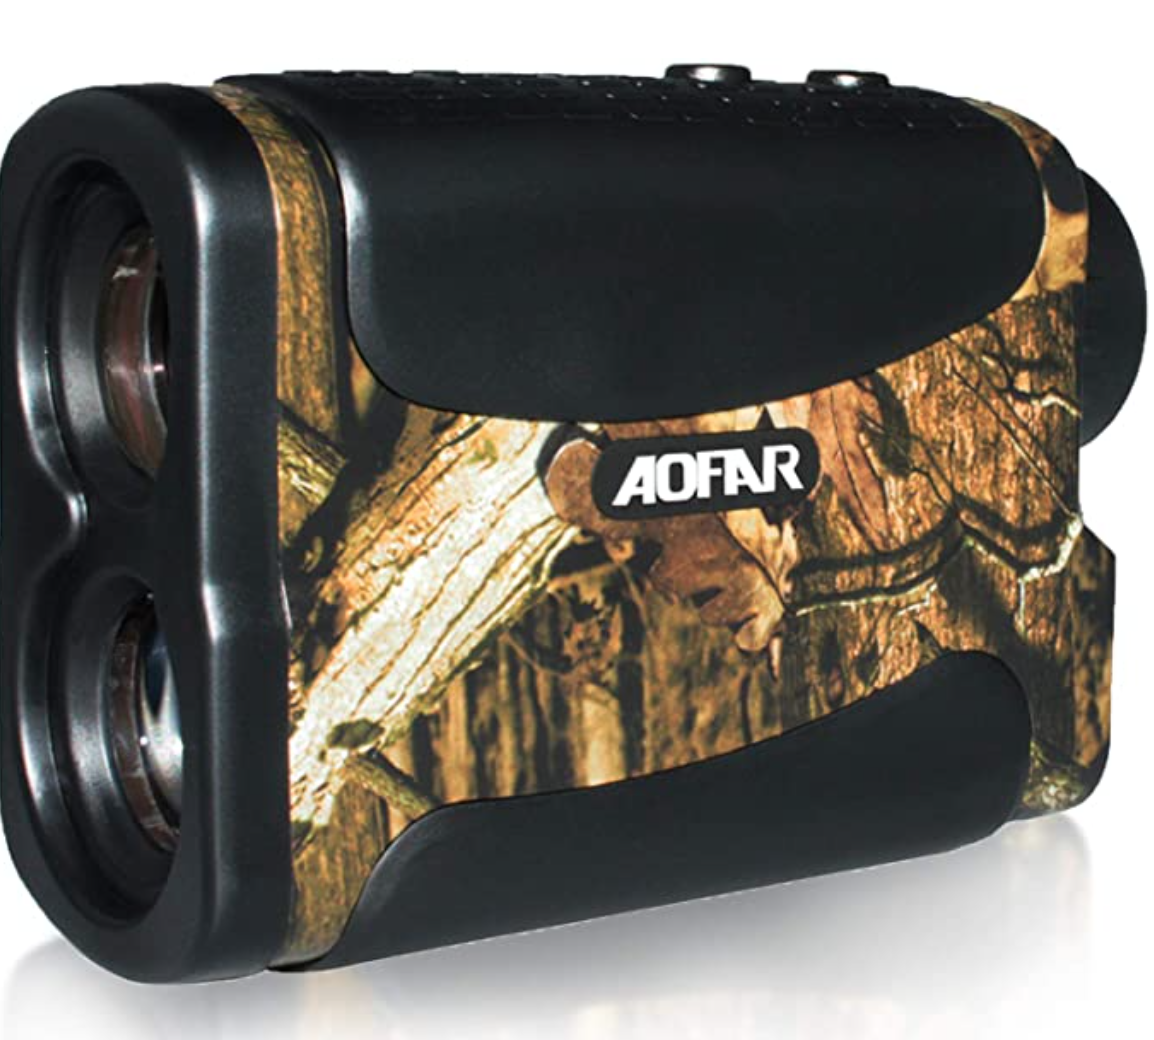 AOFAR Hunting Range Finder HX-700N/HX-800H 700/800 Yards Waterproof Archery Rangefinder for Bow Hunting with Range Scan Fog and Speed Mode, Angle and Horizontal Distance, Free Battery, Carrying Case